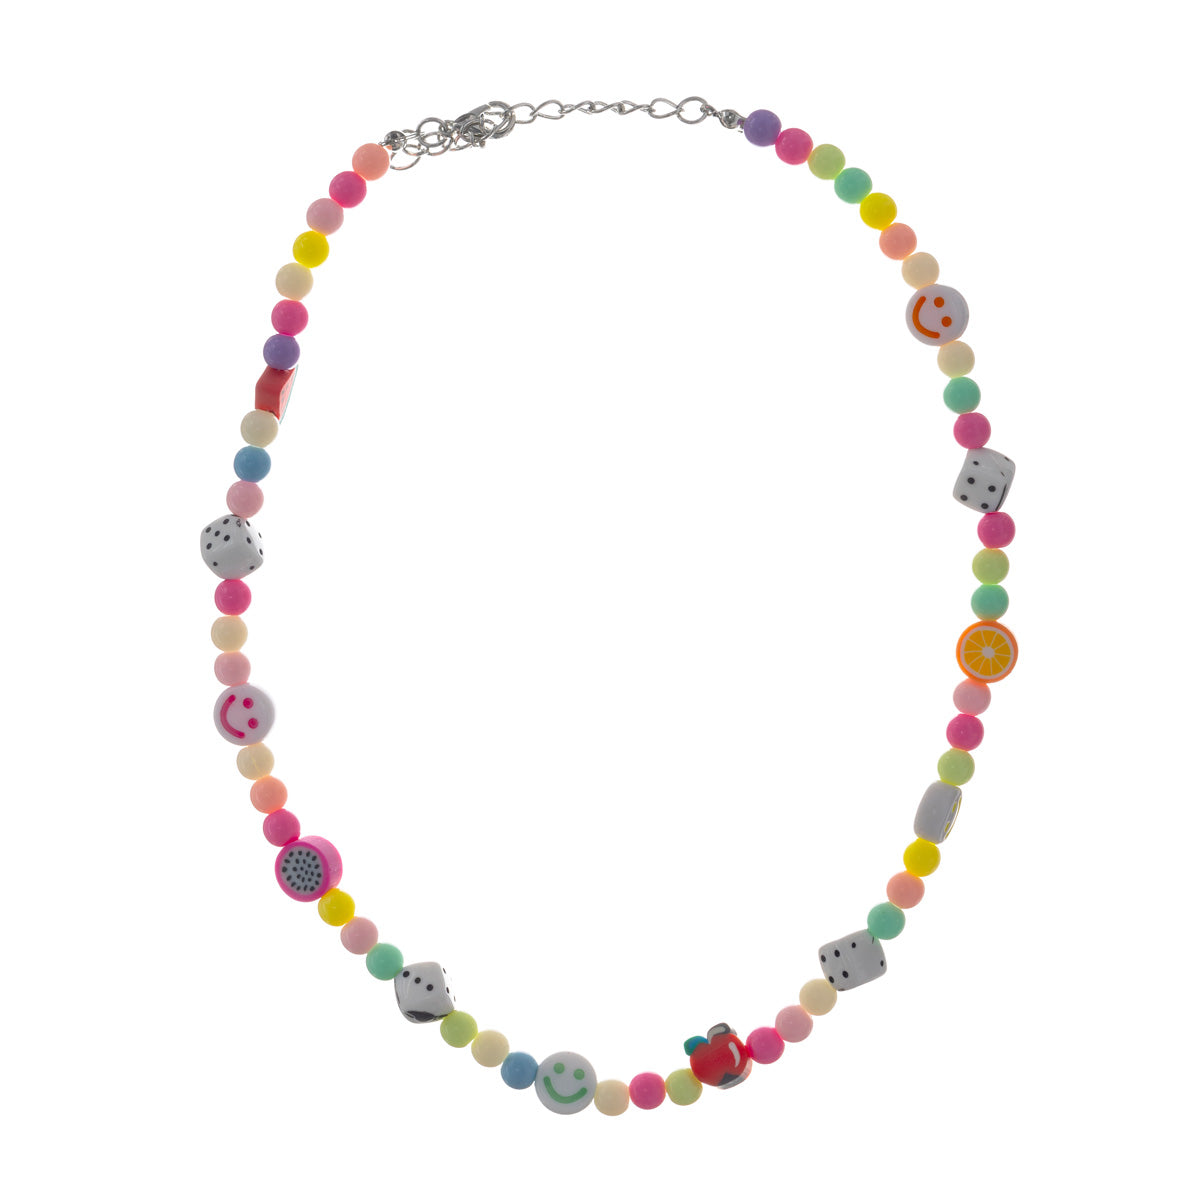 Colored beads necklace